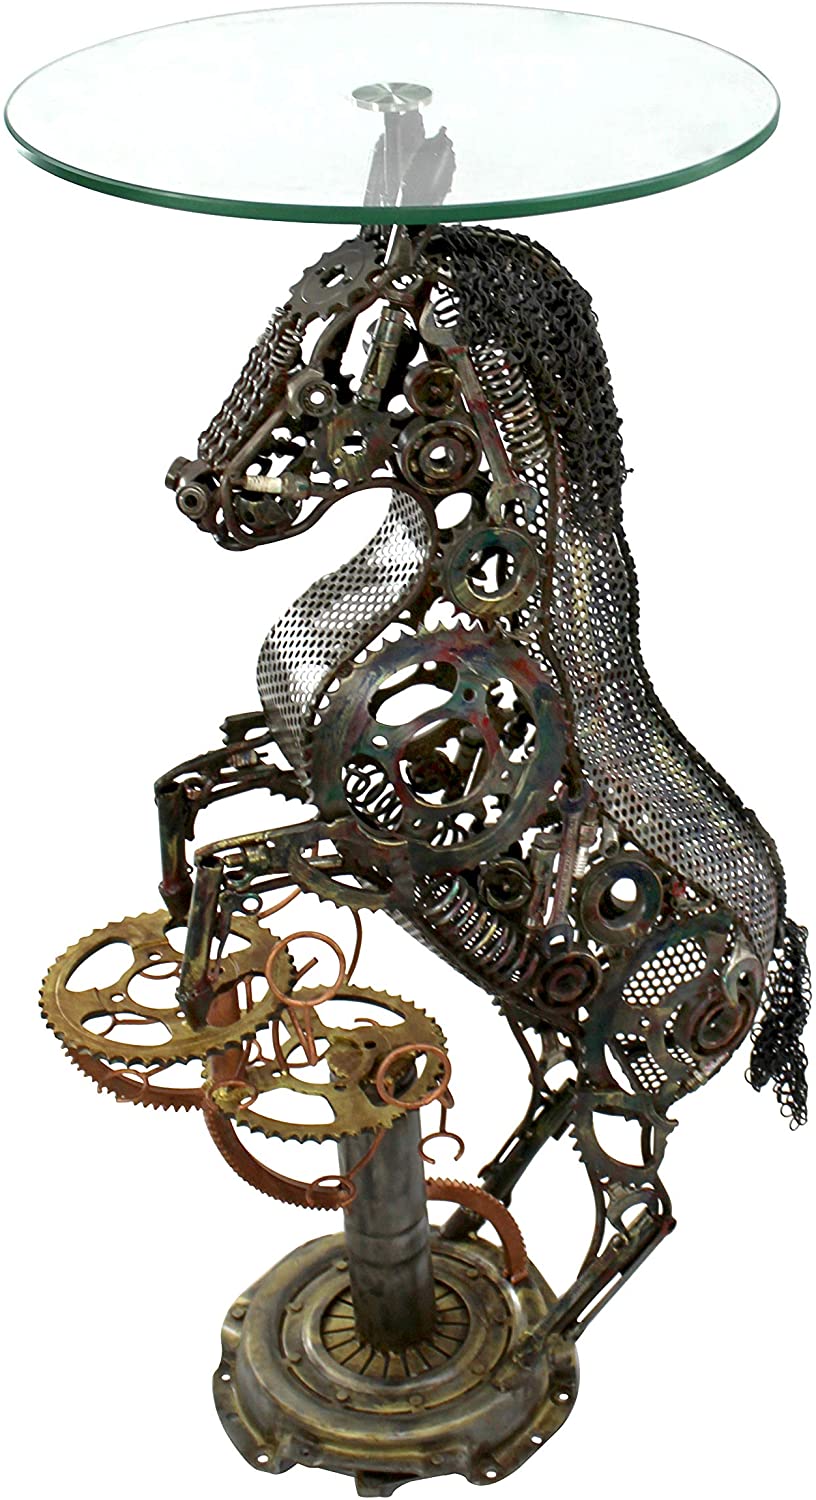 Daro Decorative Side Table With Horse Sculpture Made Of Recycled Metal And 